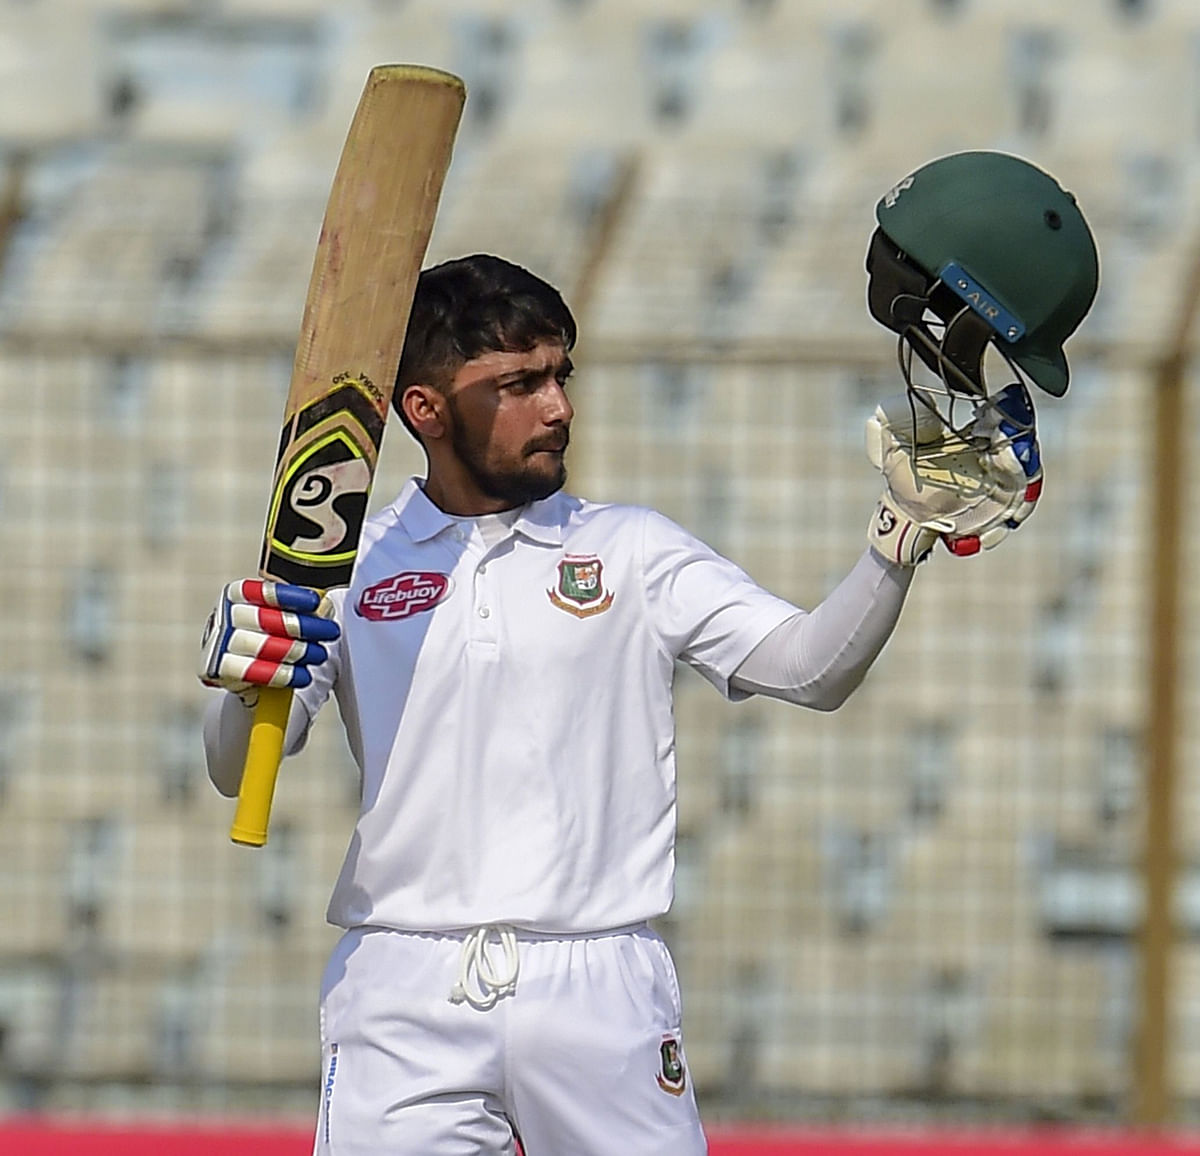 In this file photo taken on 22 November, 2018 Bangladesh cricketer Mominul Haque reacts after scoring a century during the first day of the first Test cricket match between Bangladesh and West Indies at the Zahur Ahmed Chowdhury Stadium in Chittagong. Photo: AFP